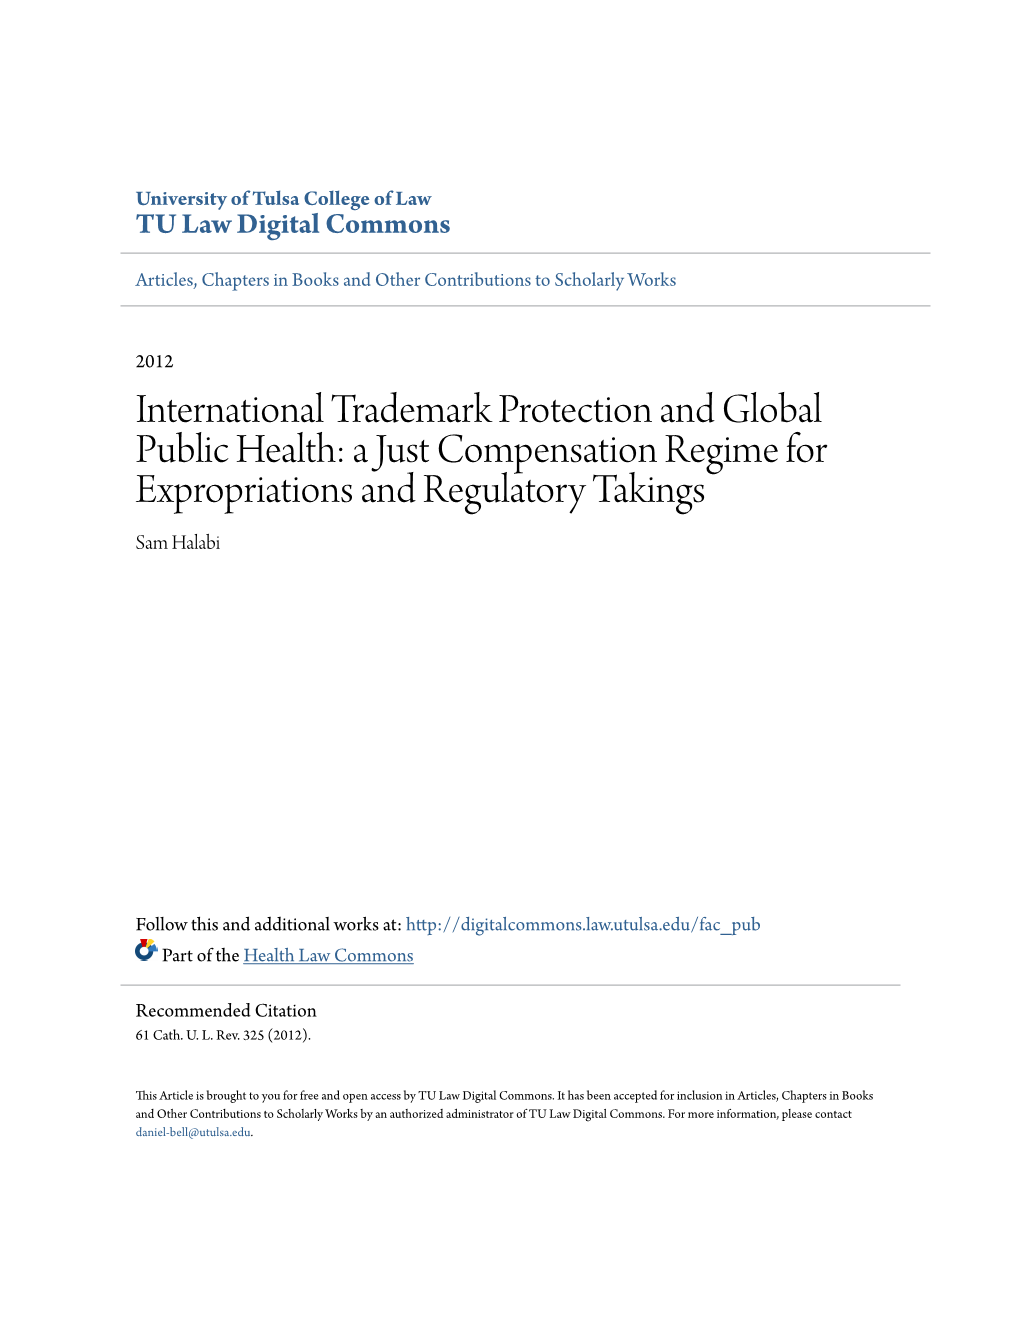 International Trademark Protection and Global Public Health: a Just Compensation Regime for Expropriations and Regulatory Takings Sam Halabi